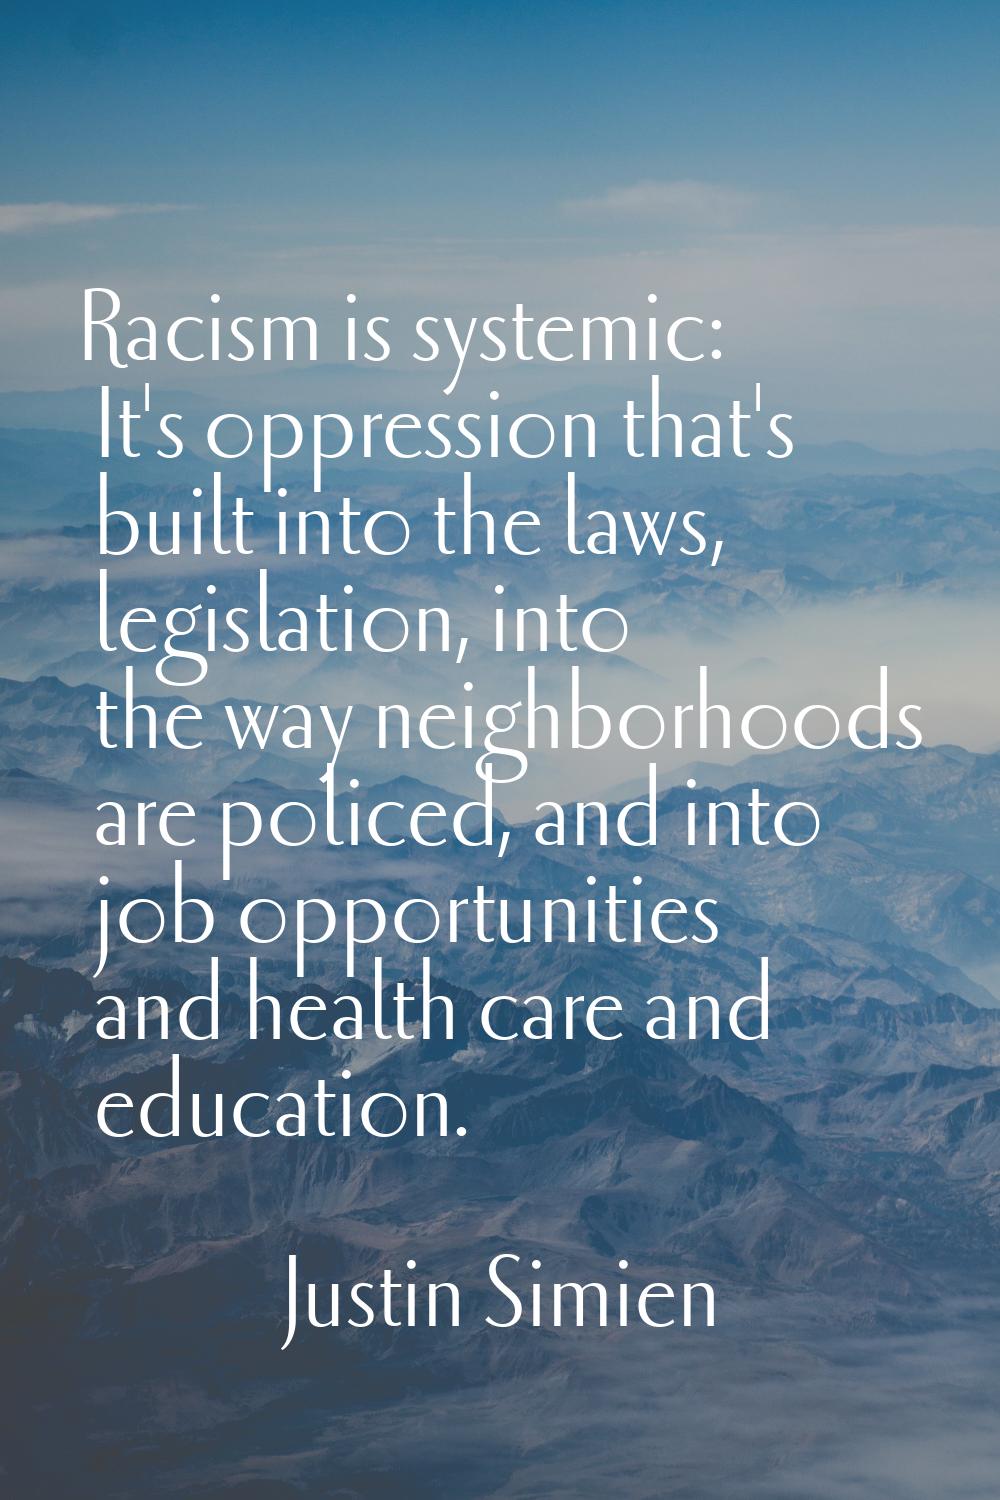 Racism is systemic: It's oppression that's built into the laws, legislation, into the way neighborh